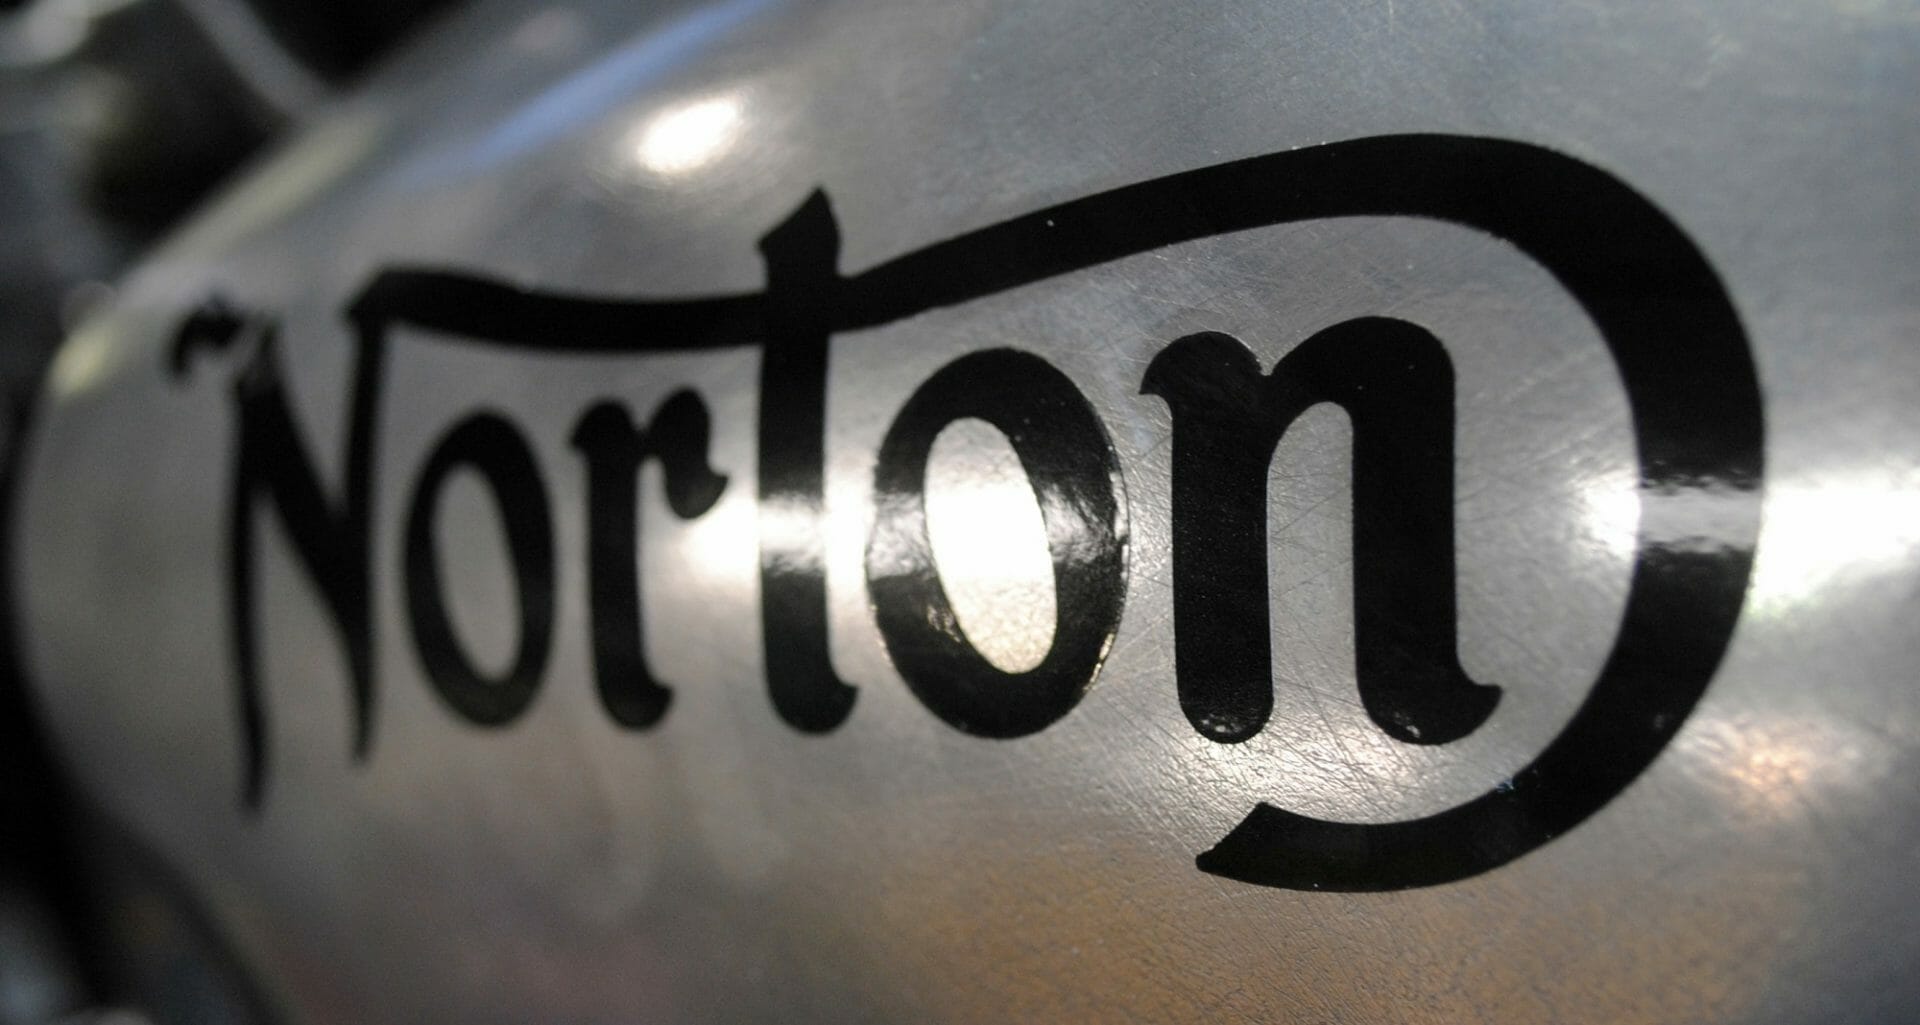 Norton wants to develop electric motorcycle- MOTORCYCLES.NEWS